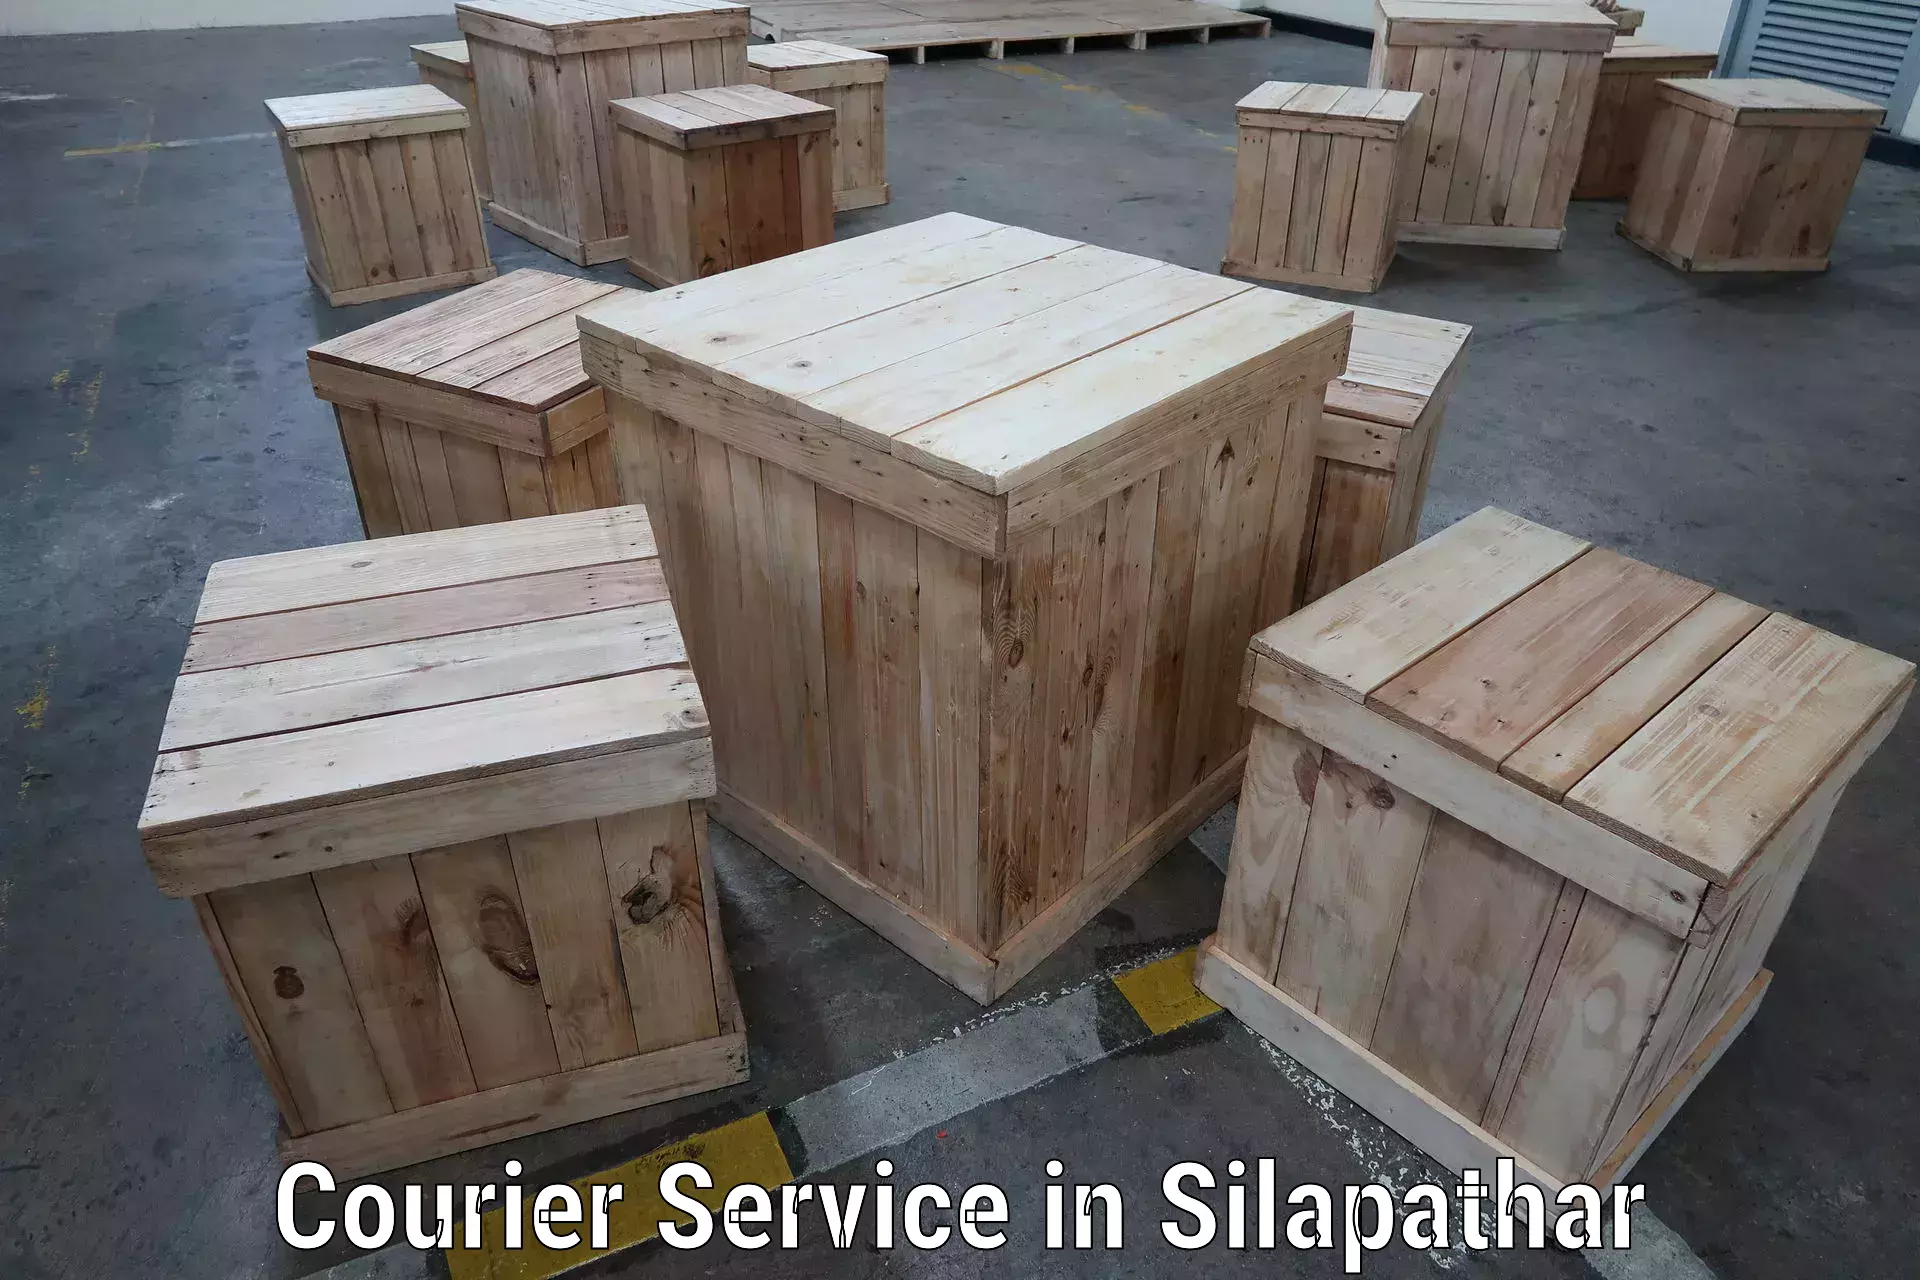 Regular parcel service in Silapathar